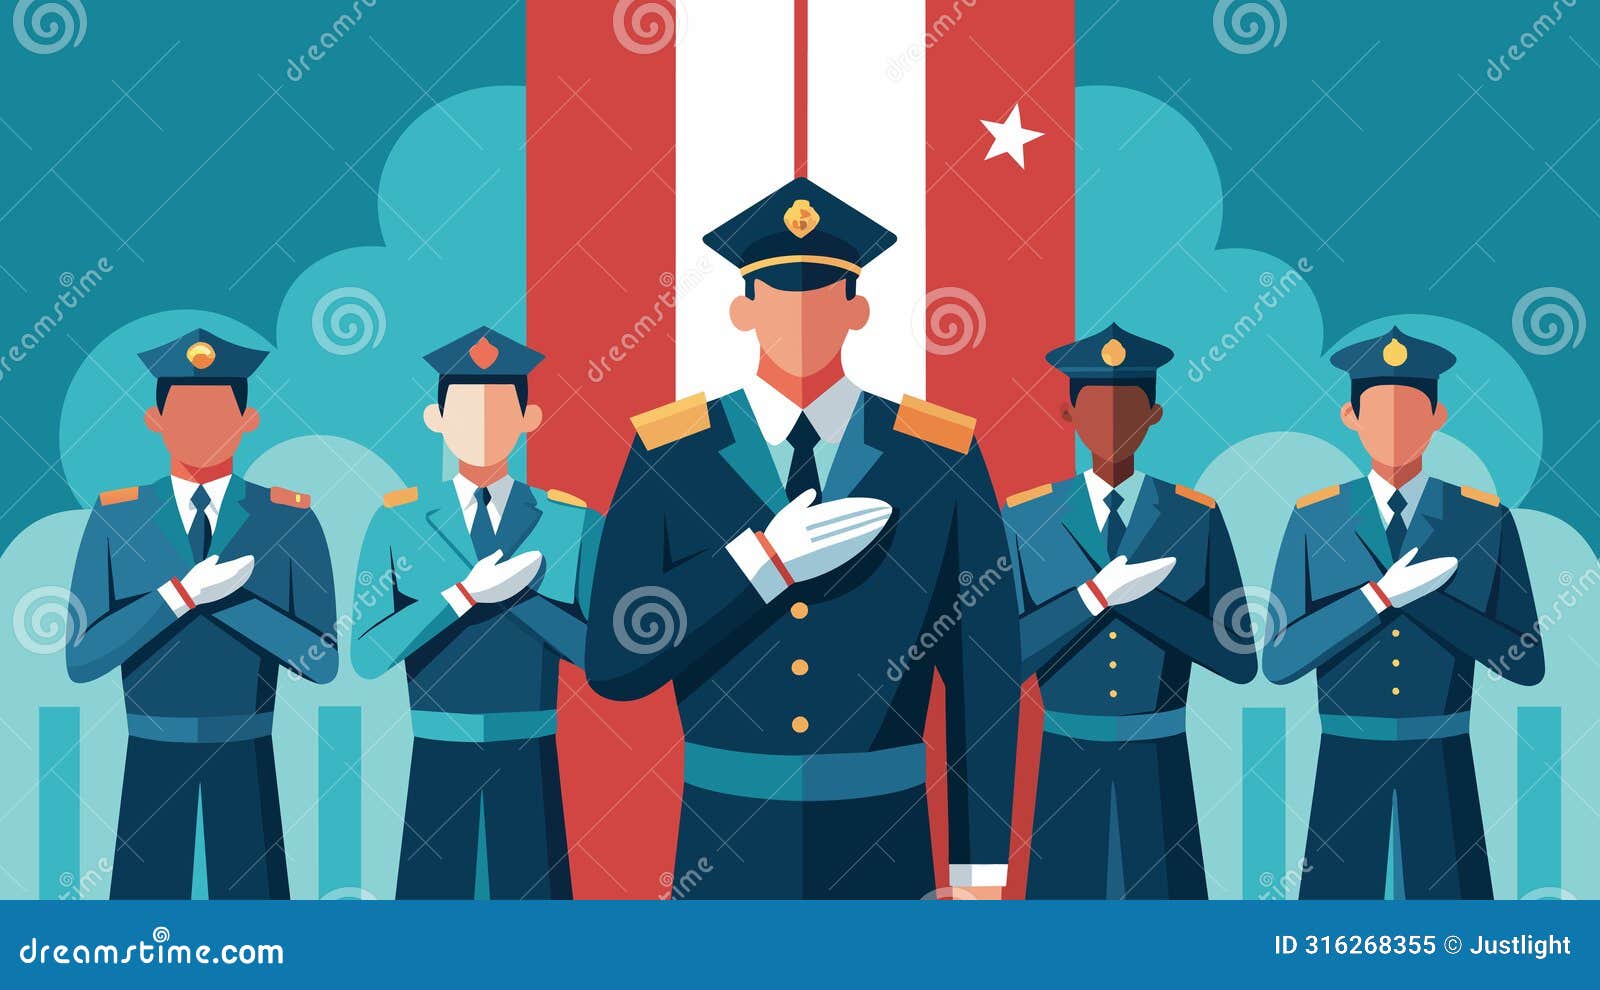 as the band plays the national anthem the honor guard stands at attention their hands p firmly over their hearts paying